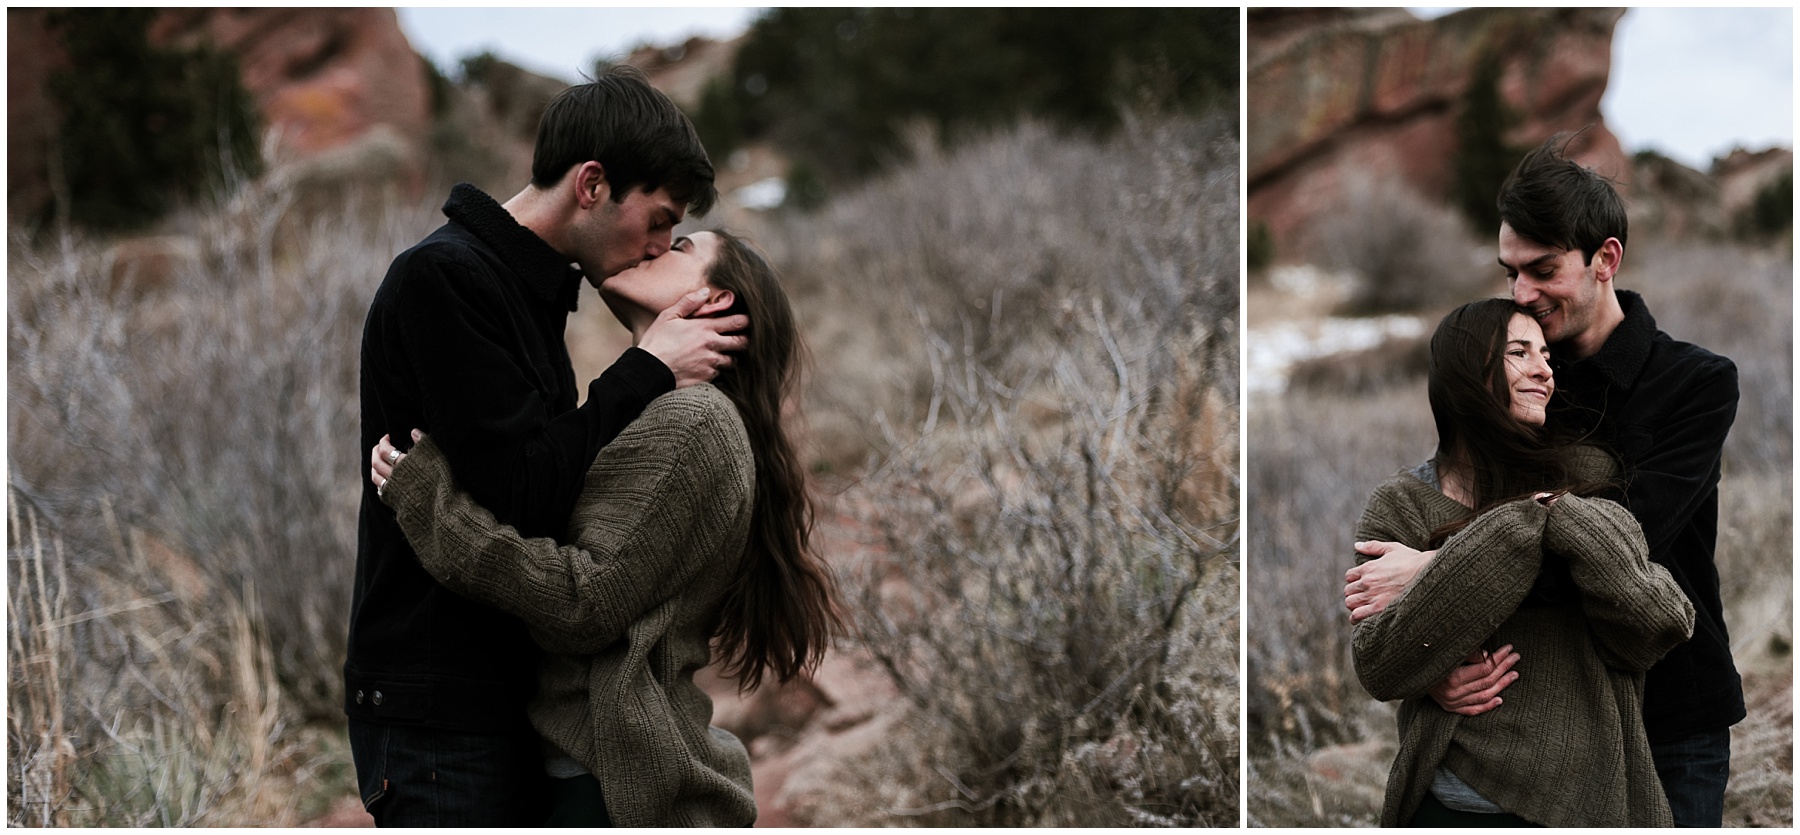 Katesalleyphotography-181_engagement shoot at Red Rocks.jpg